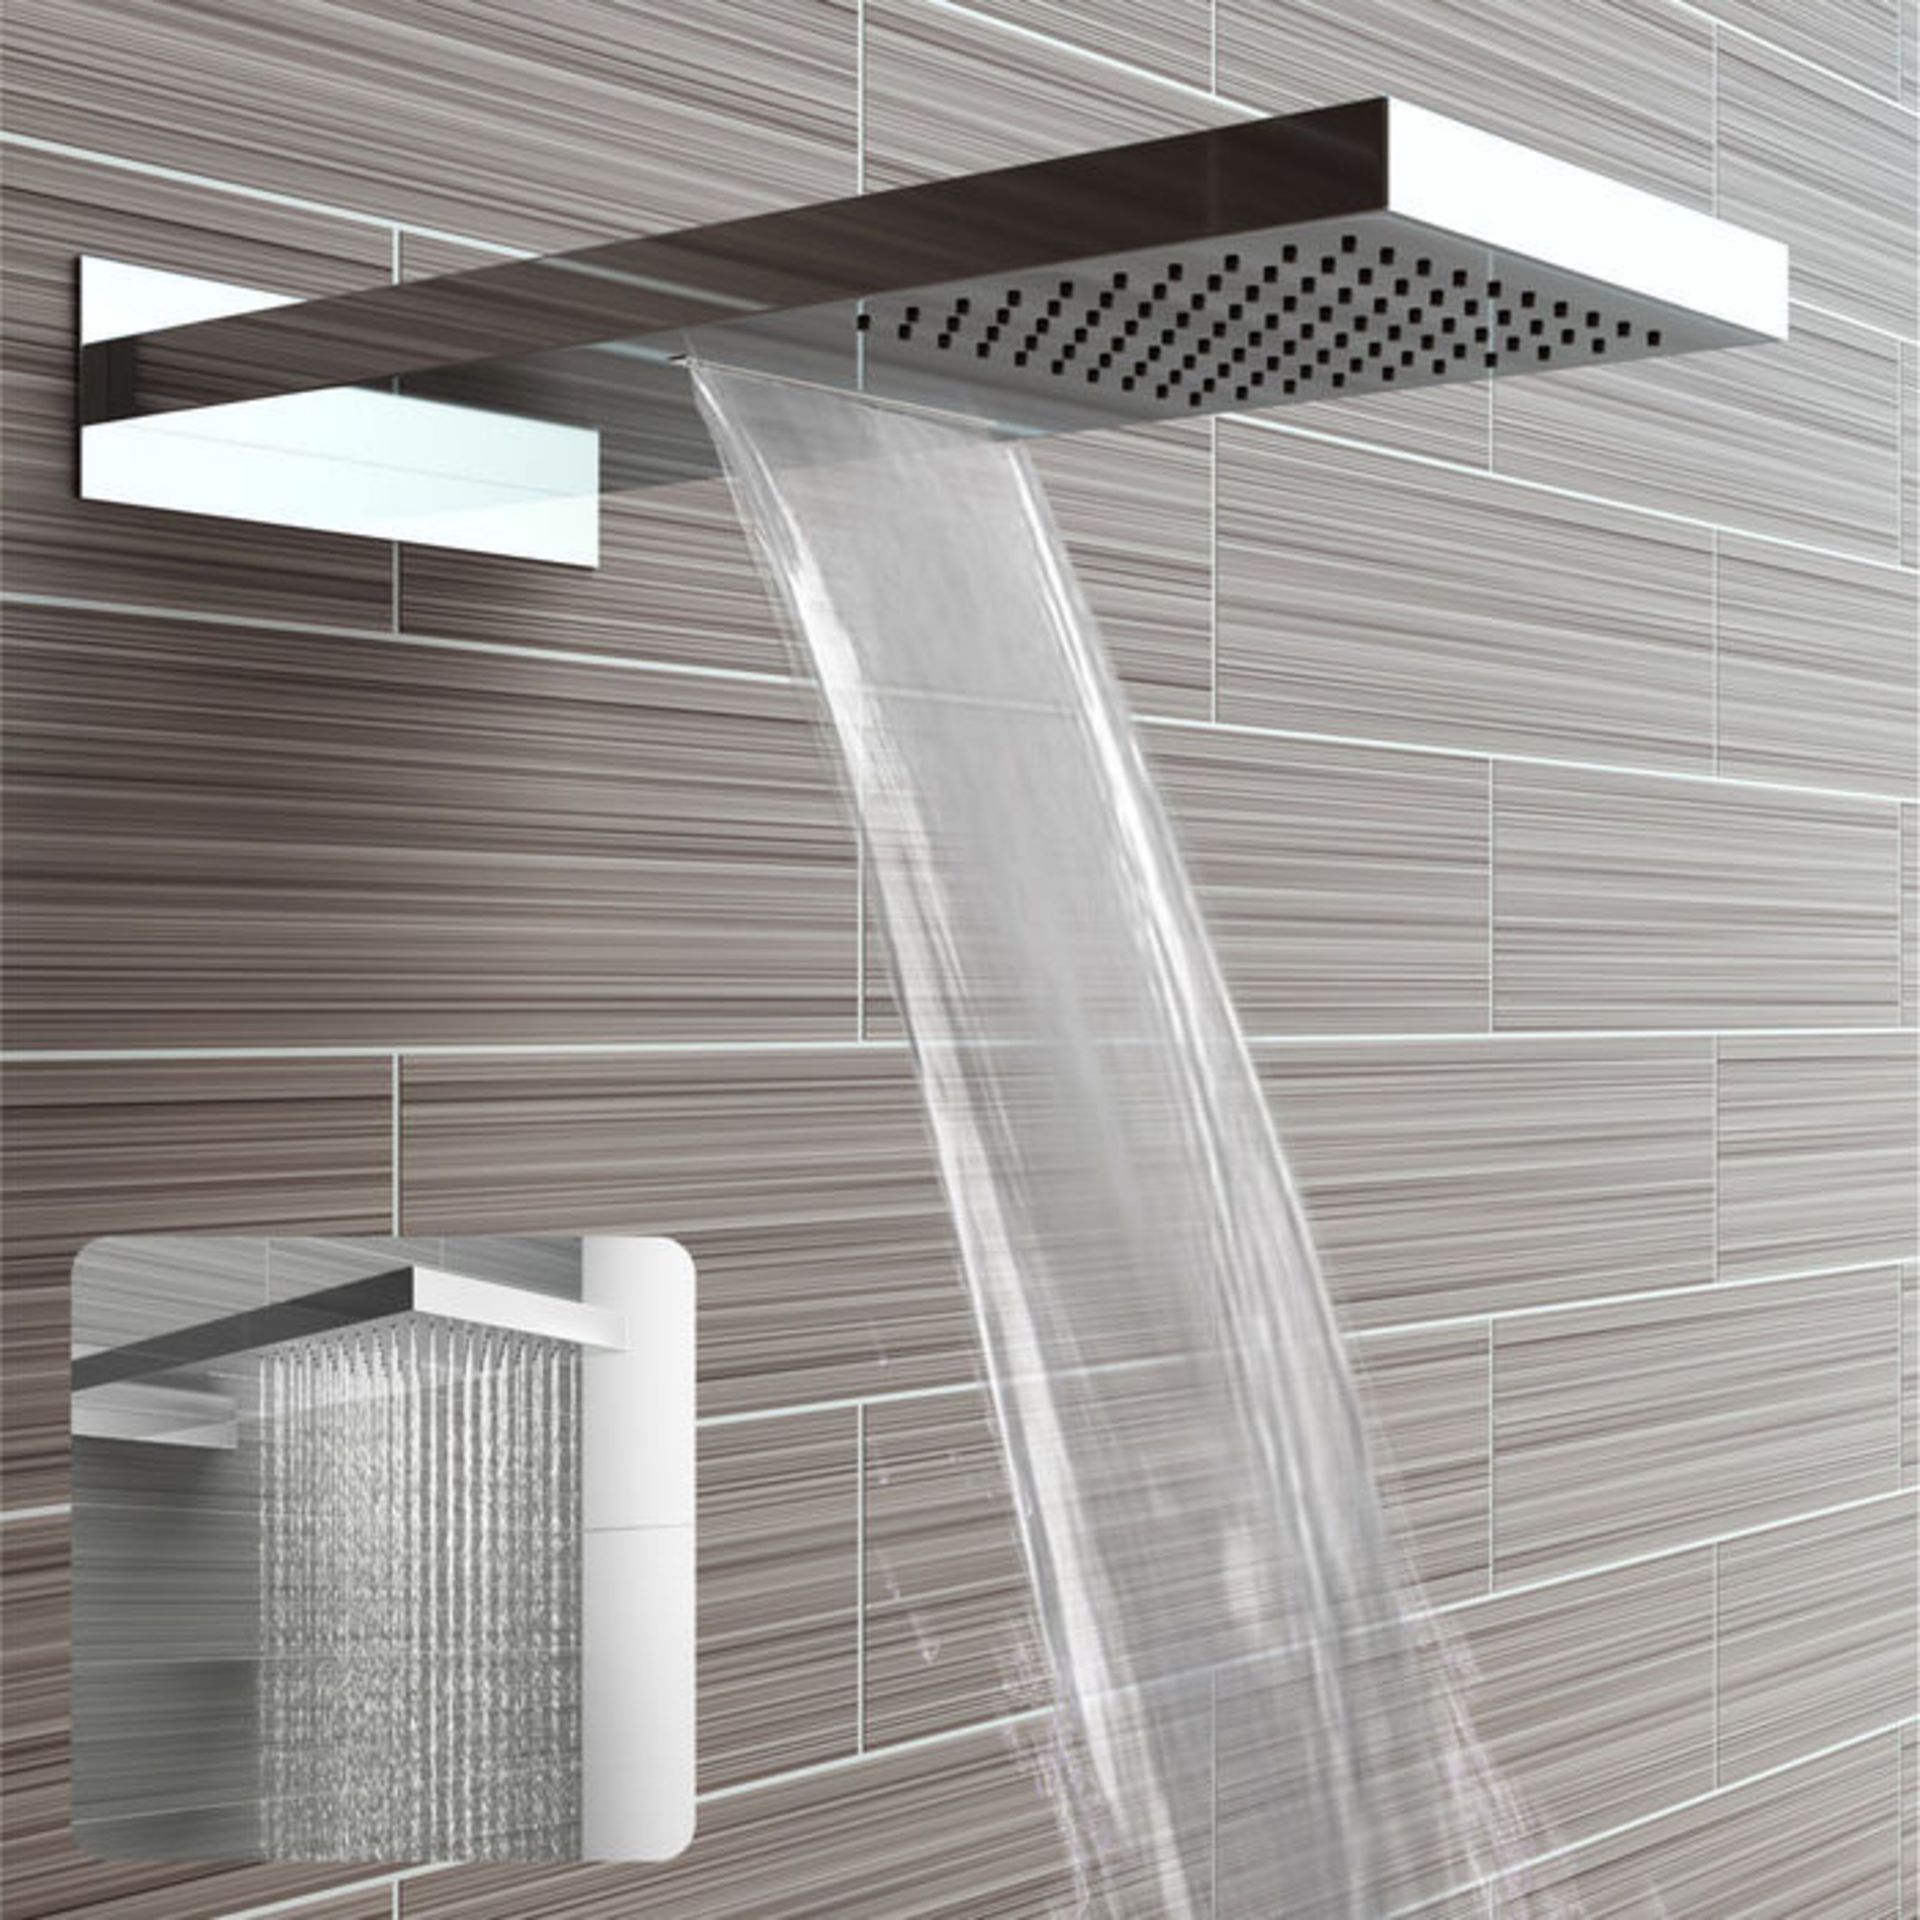 (AA9) Stainless Steel 230x500mm Waterfall Shower Head. RRP £374.99. Dual function waterfall an... - Image 2 of 4